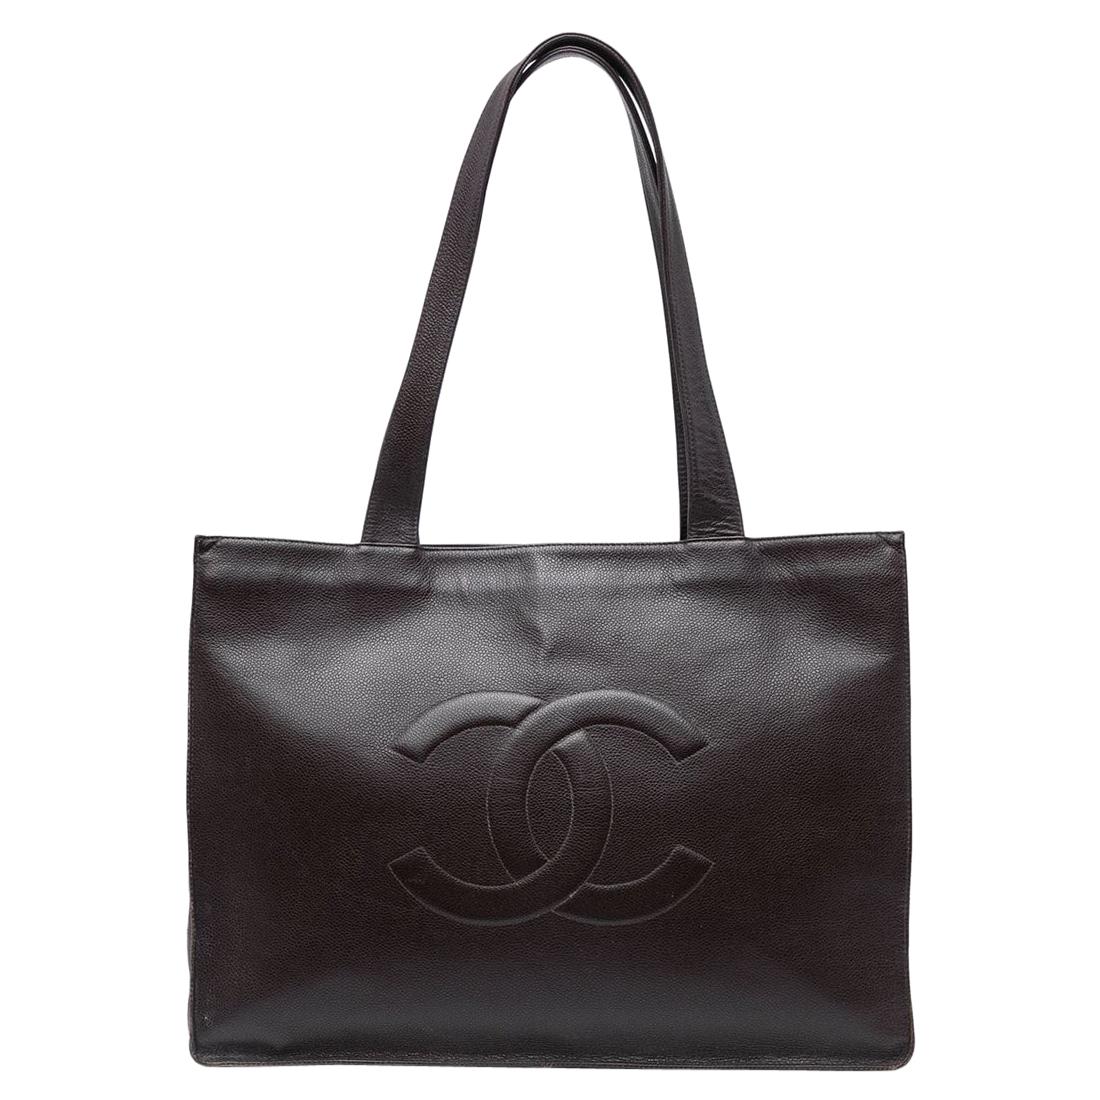 Chanel Brown Leather Tote